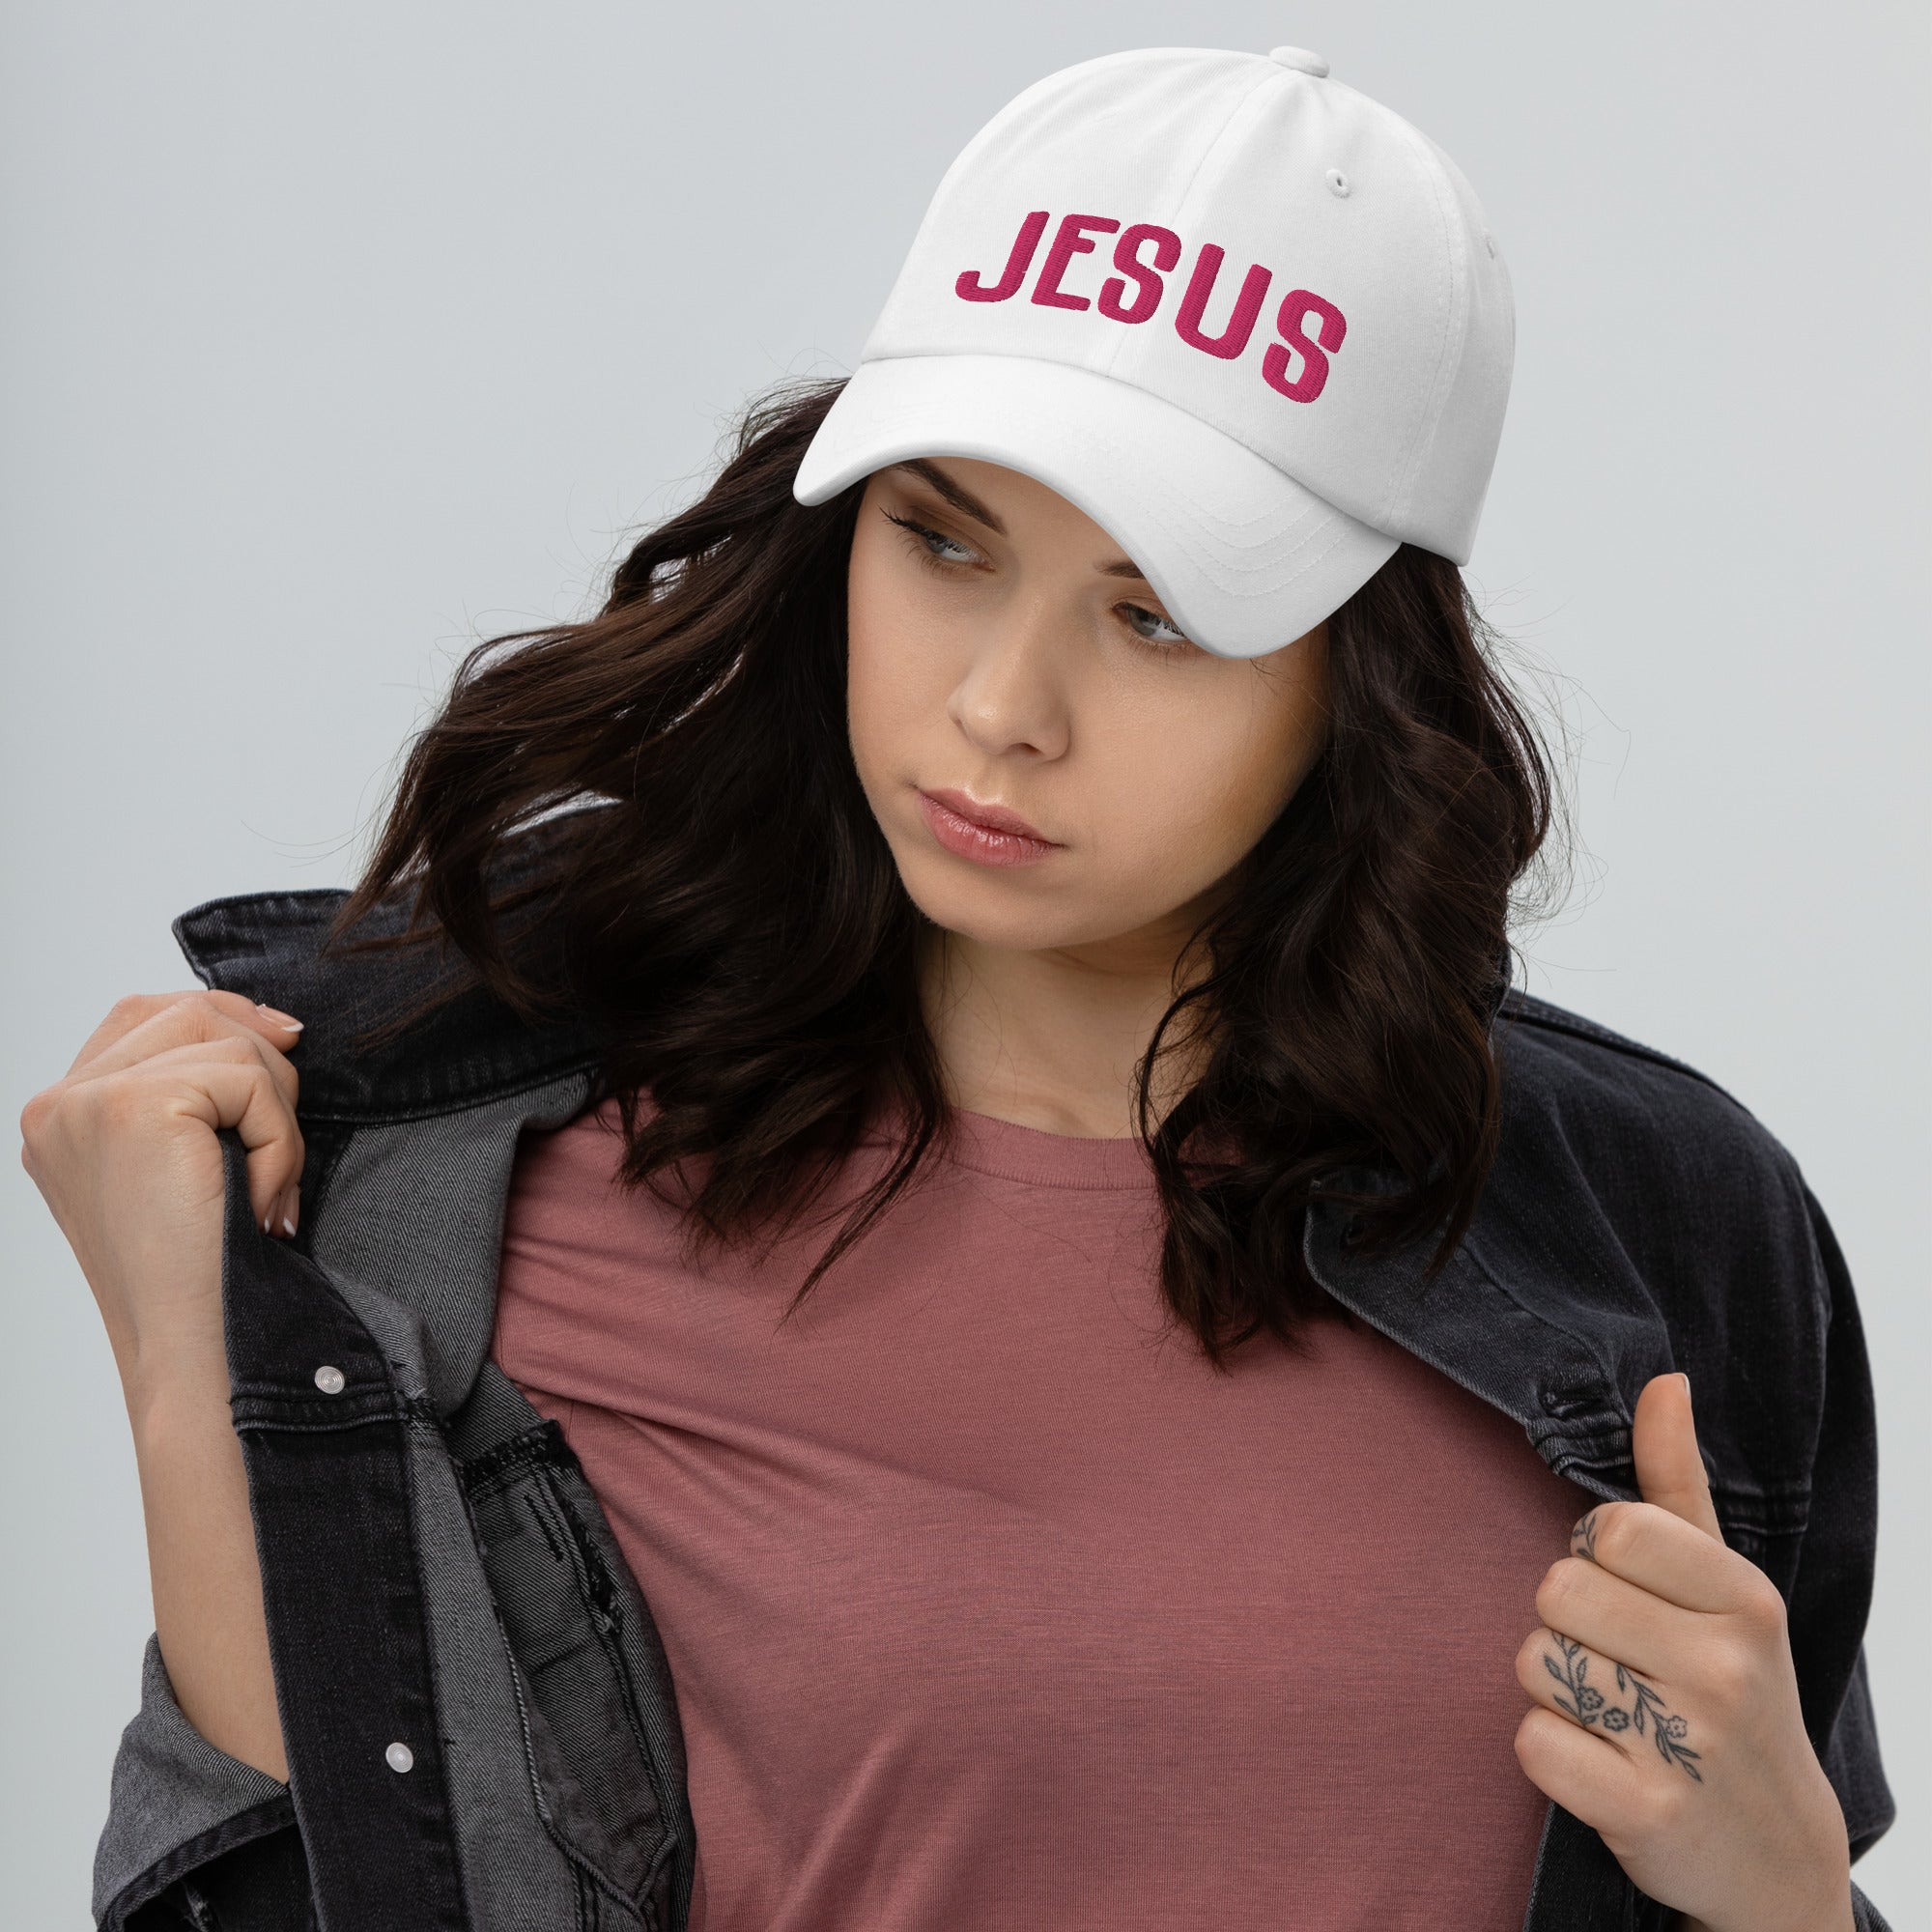 Jesus Classic Dad's Cap - White with Pink Embroidery Jesus Passion Apparel